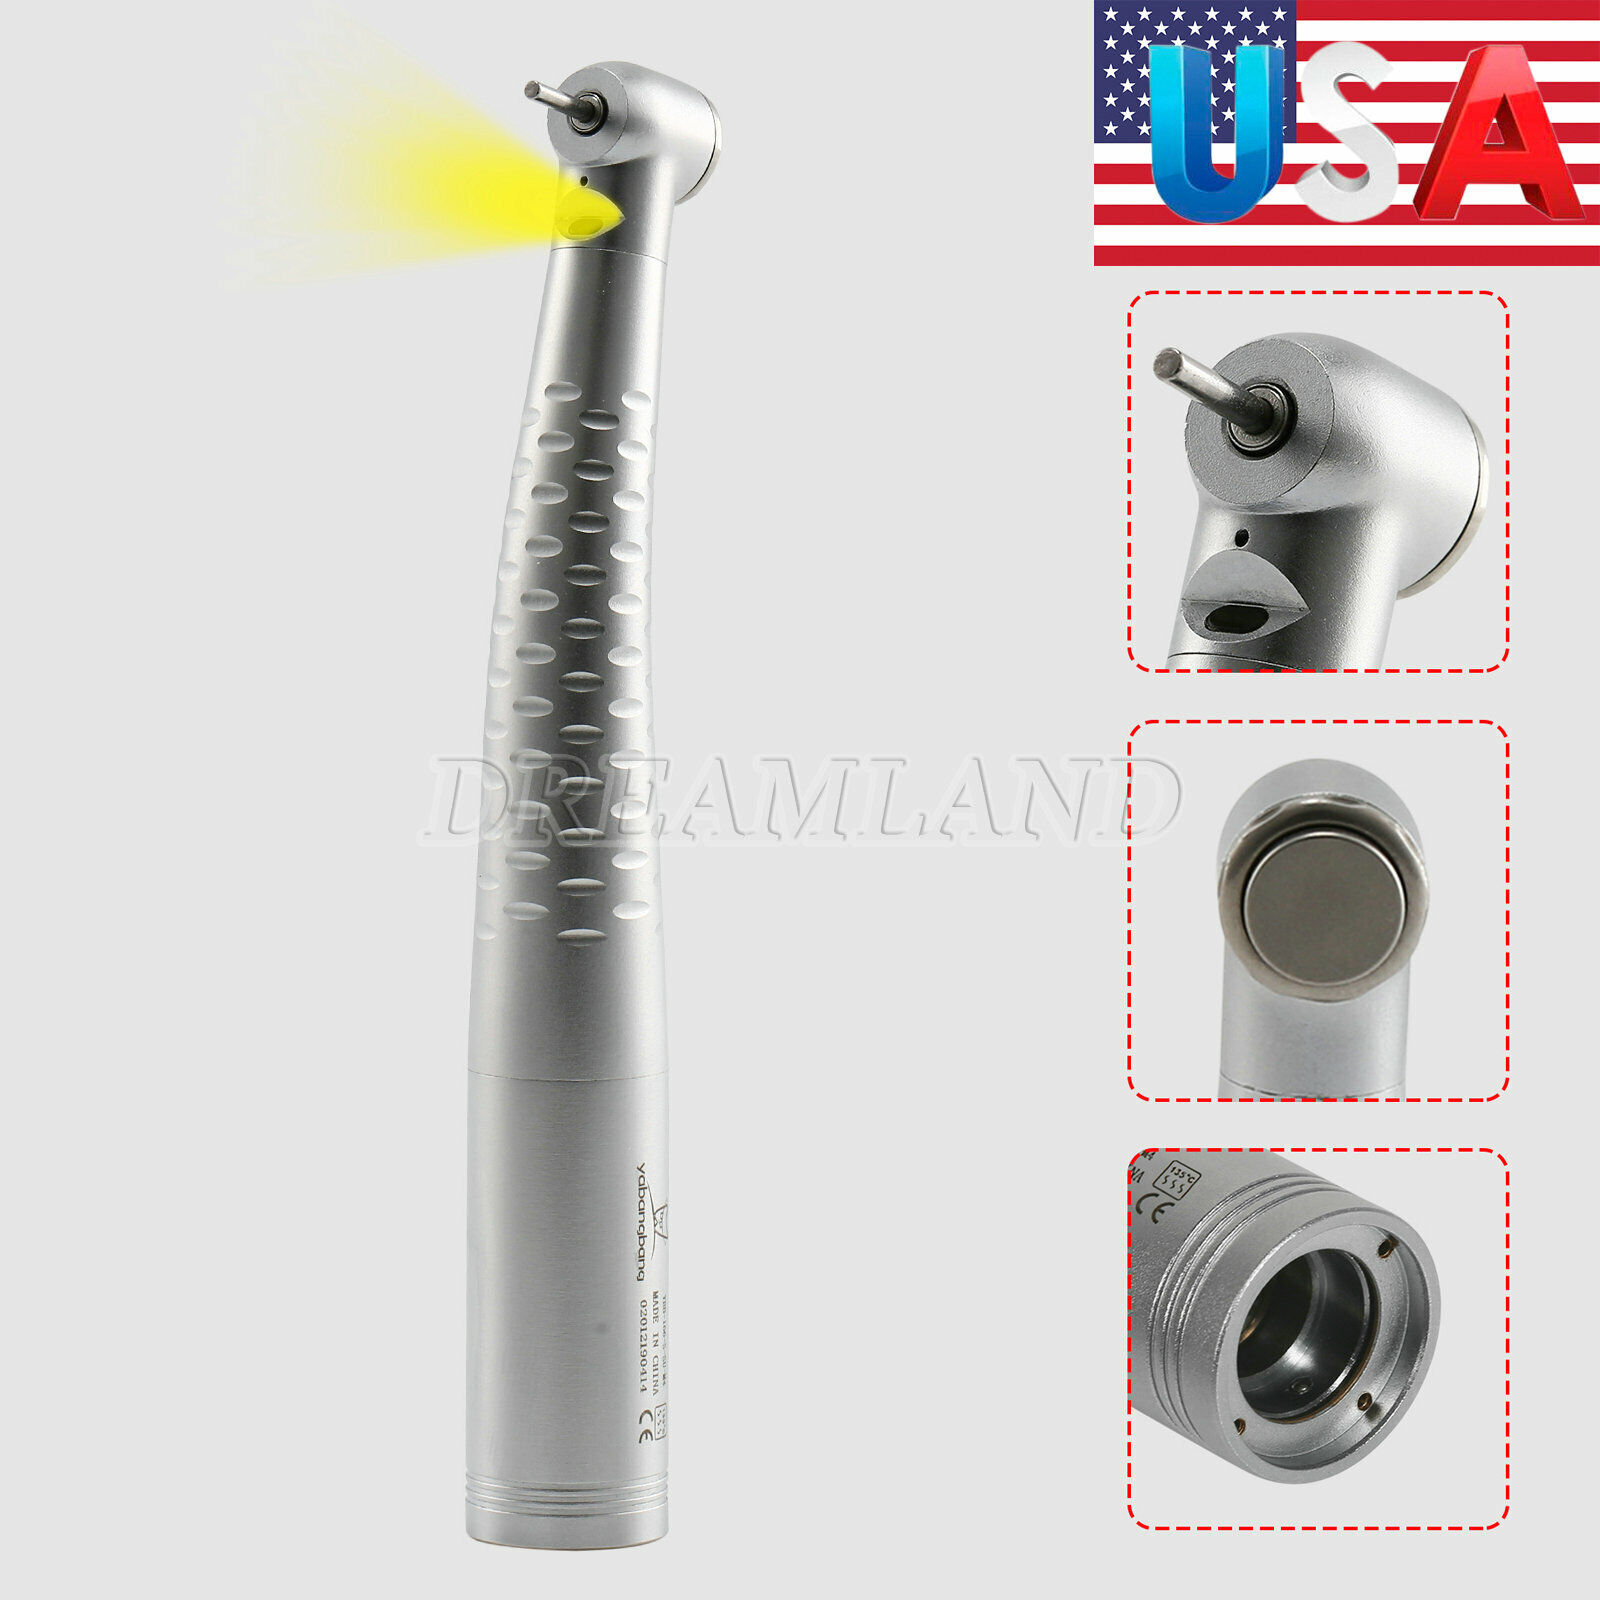 dental 6 hole high speed push button LED quick connect handpiece fiber optic yb6